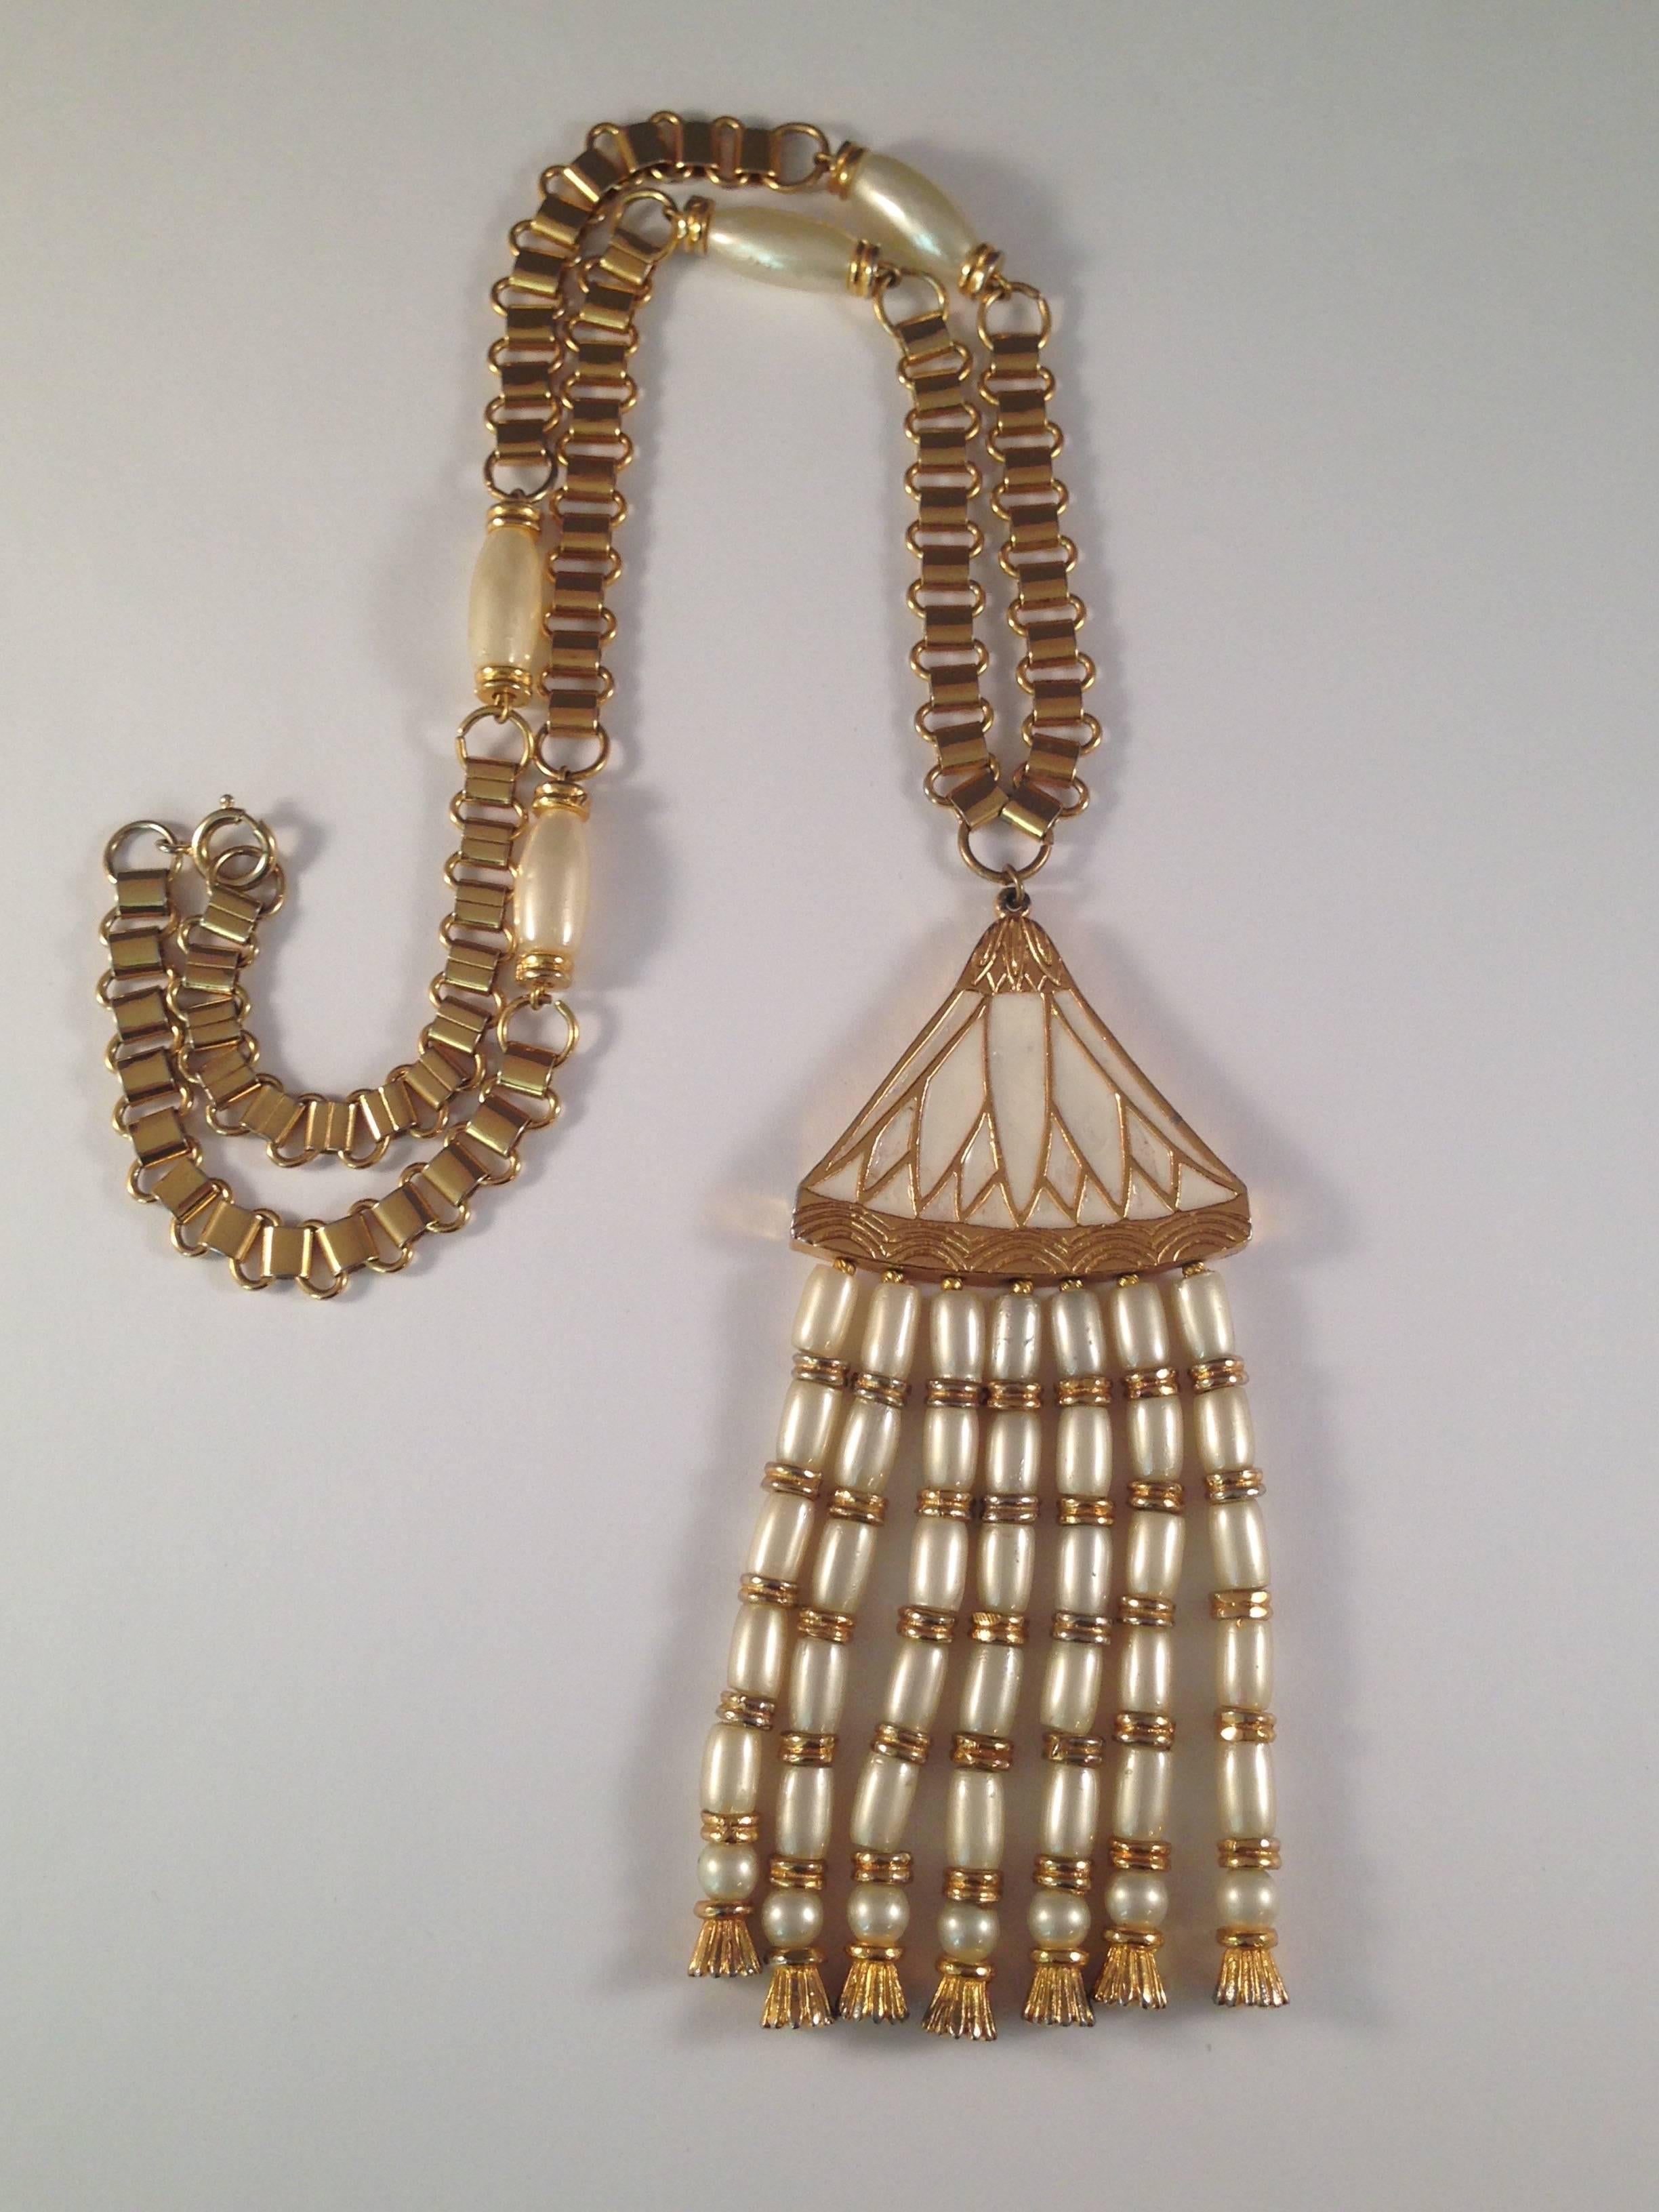 This is a 1960s Miriam Haskell Egyptian Revival gold tone book chain necklace with a lotus pendant. The chain measures 22